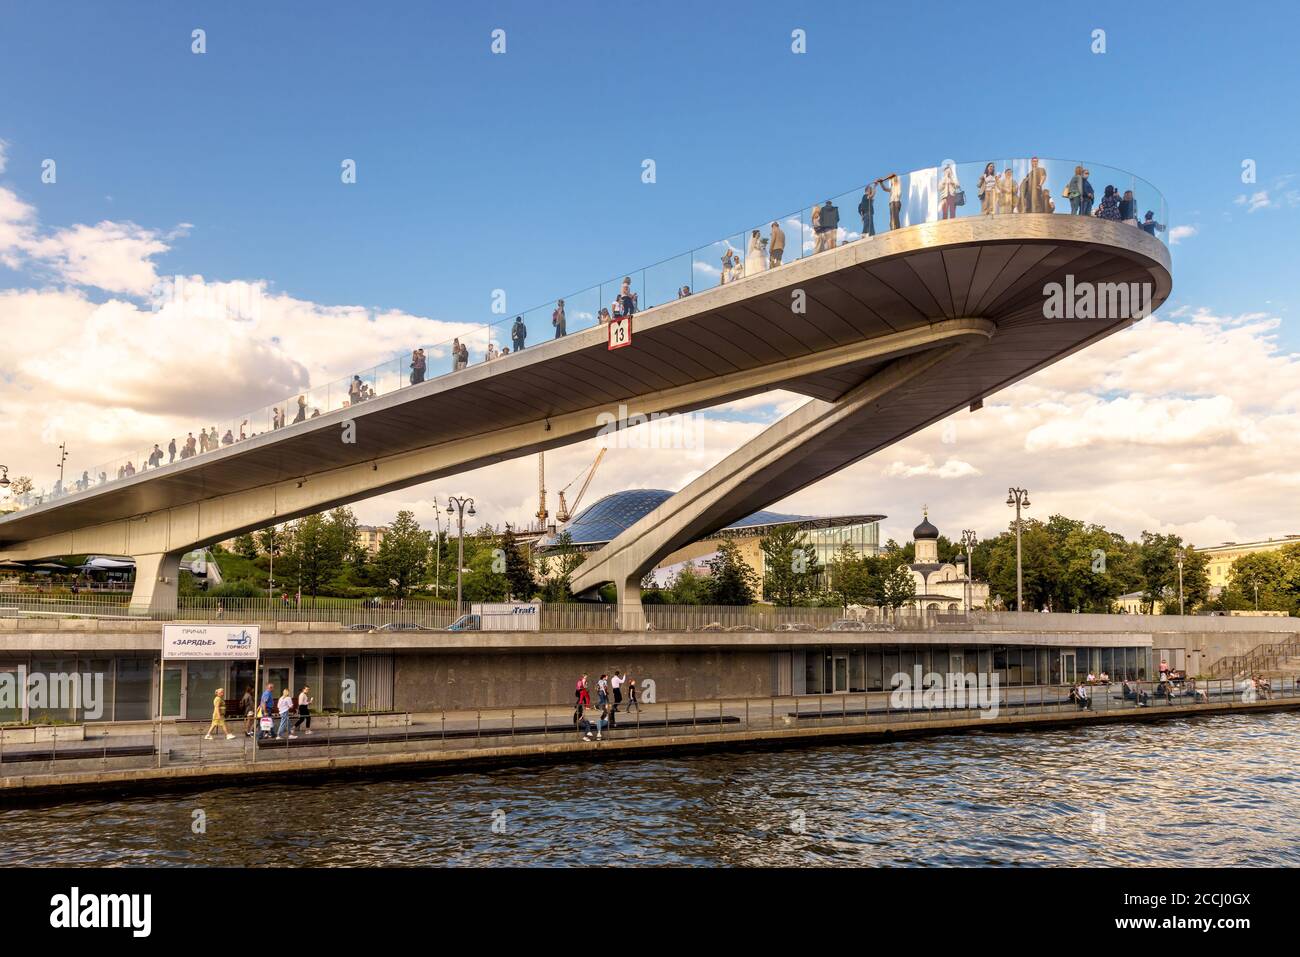 CHECK OUT THE RUSSIAN MOVEABLE BRIDGE CALLED PALACE BRIDGE, WITH A TOTAL LENGTH OF 260.1 METERS.